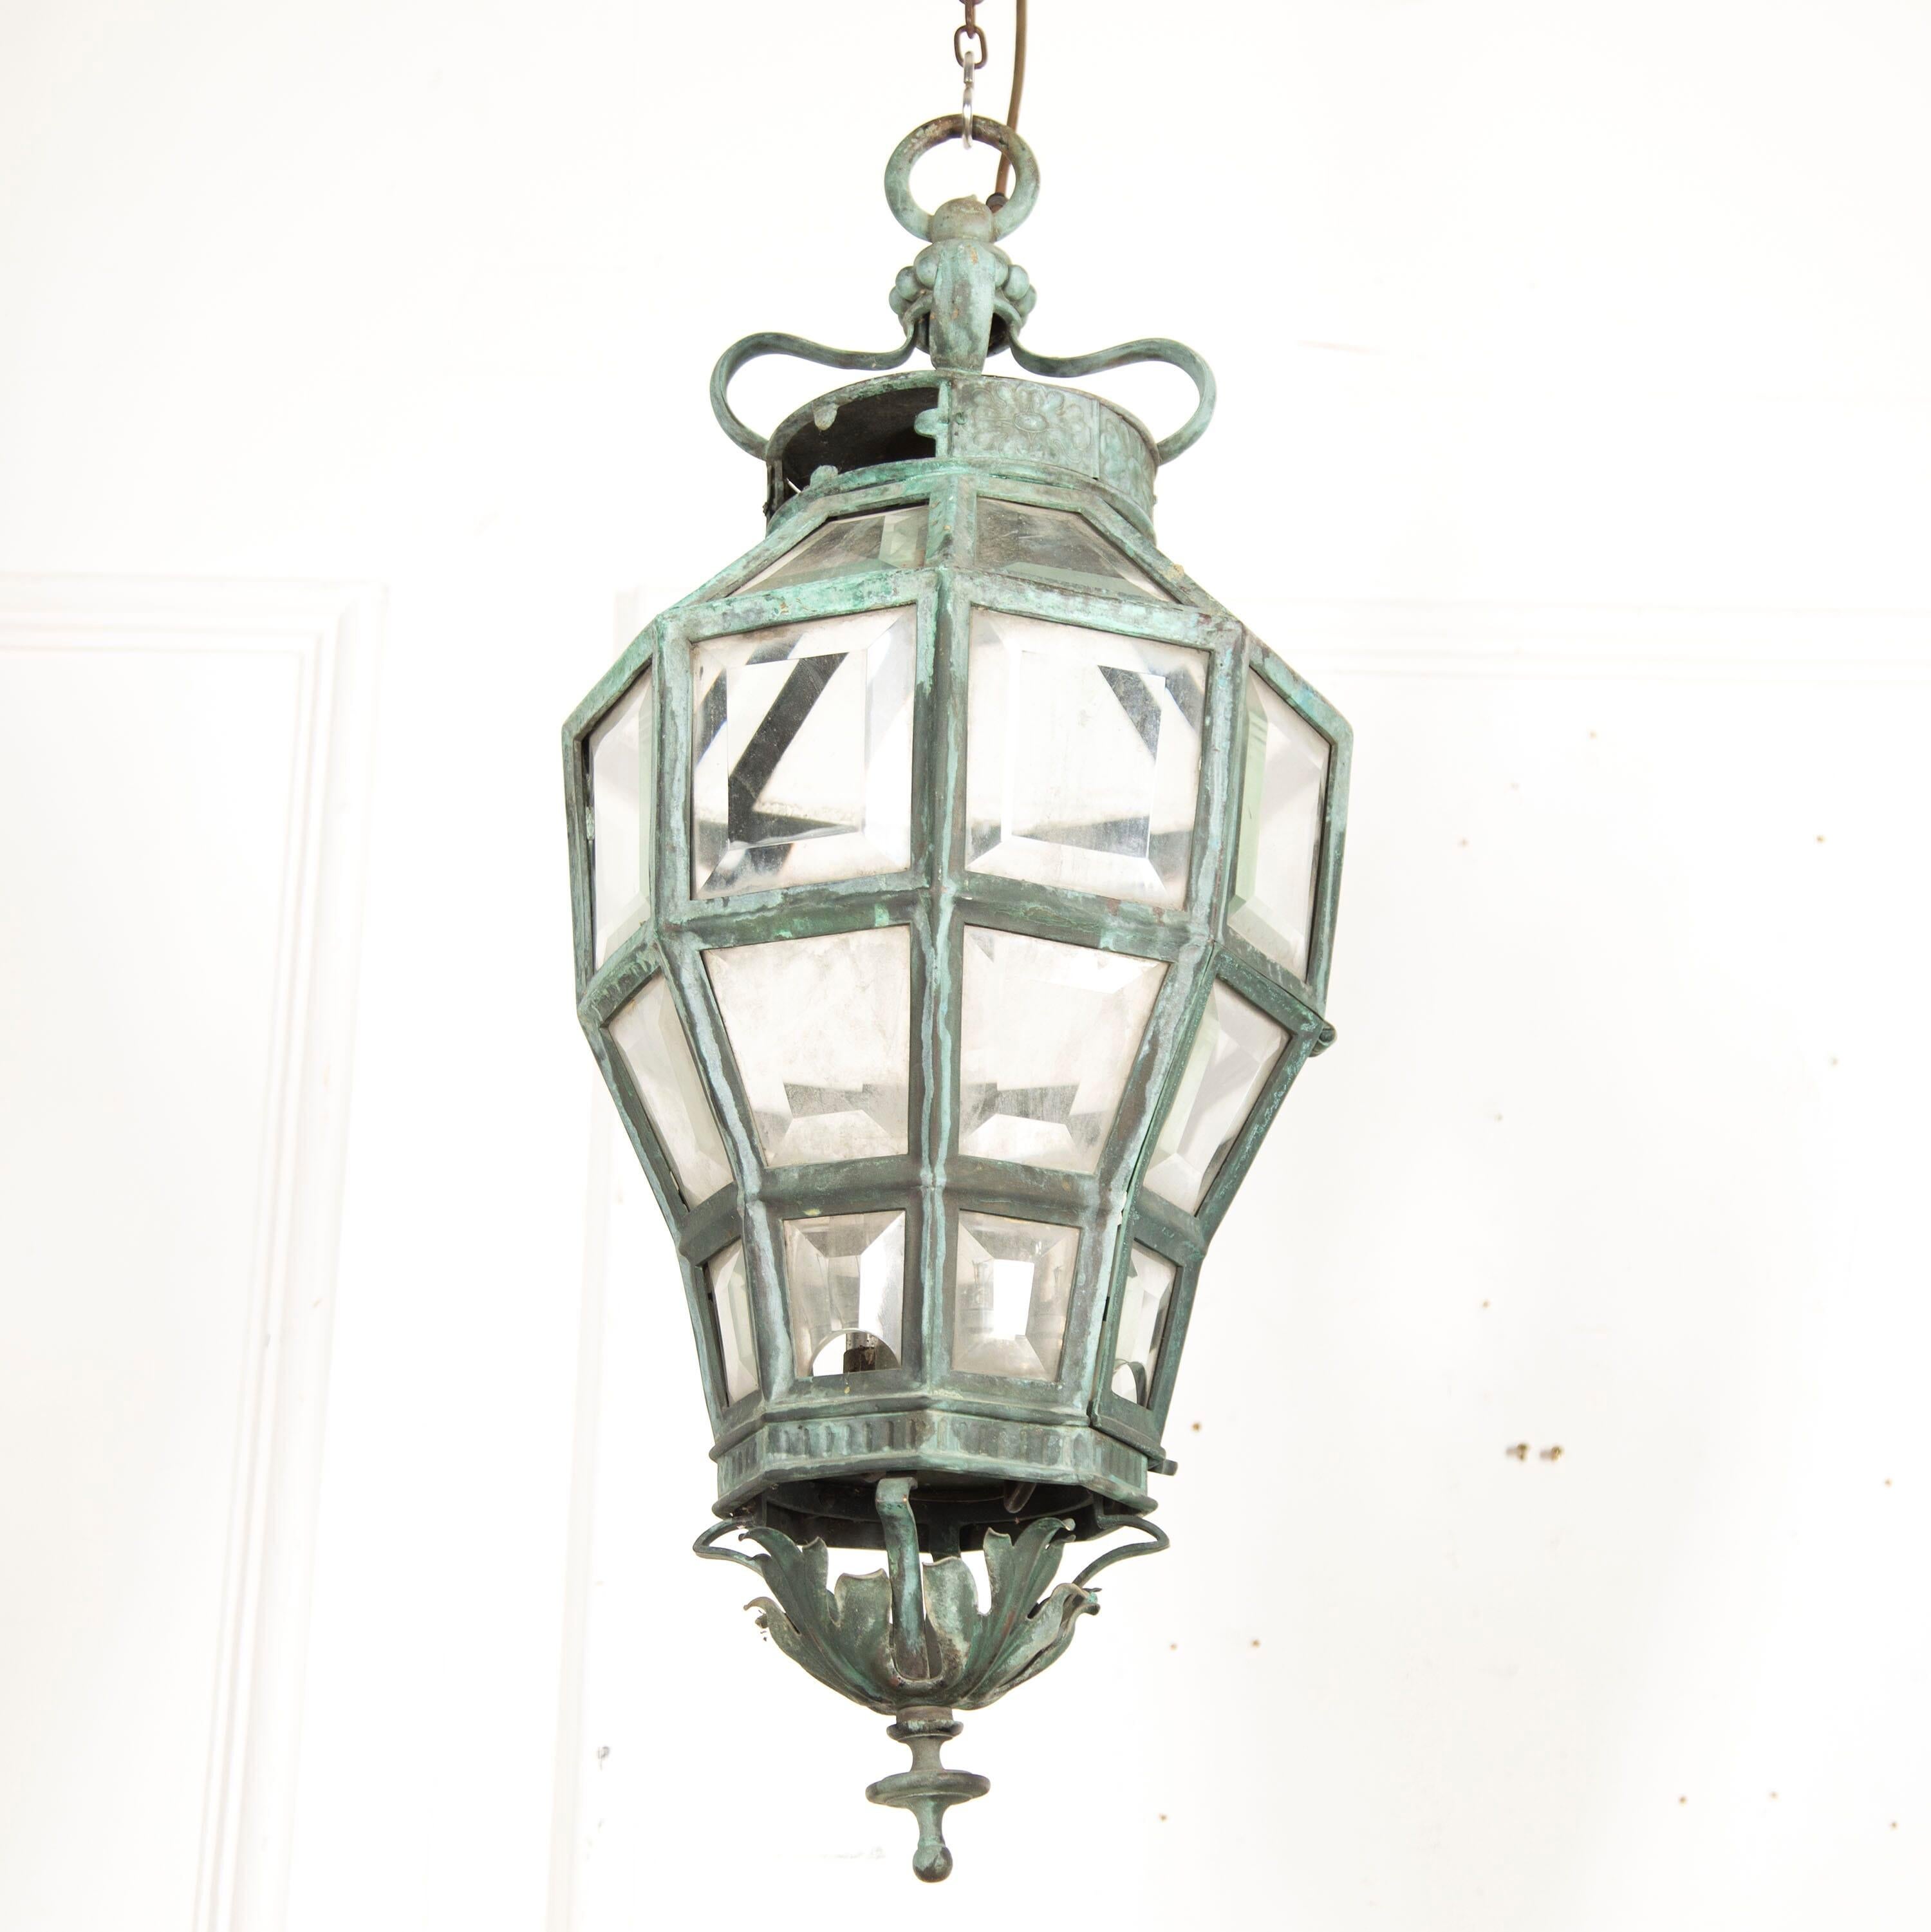 Late 19th century Italian octagonal bronze lantern with faceted glass.